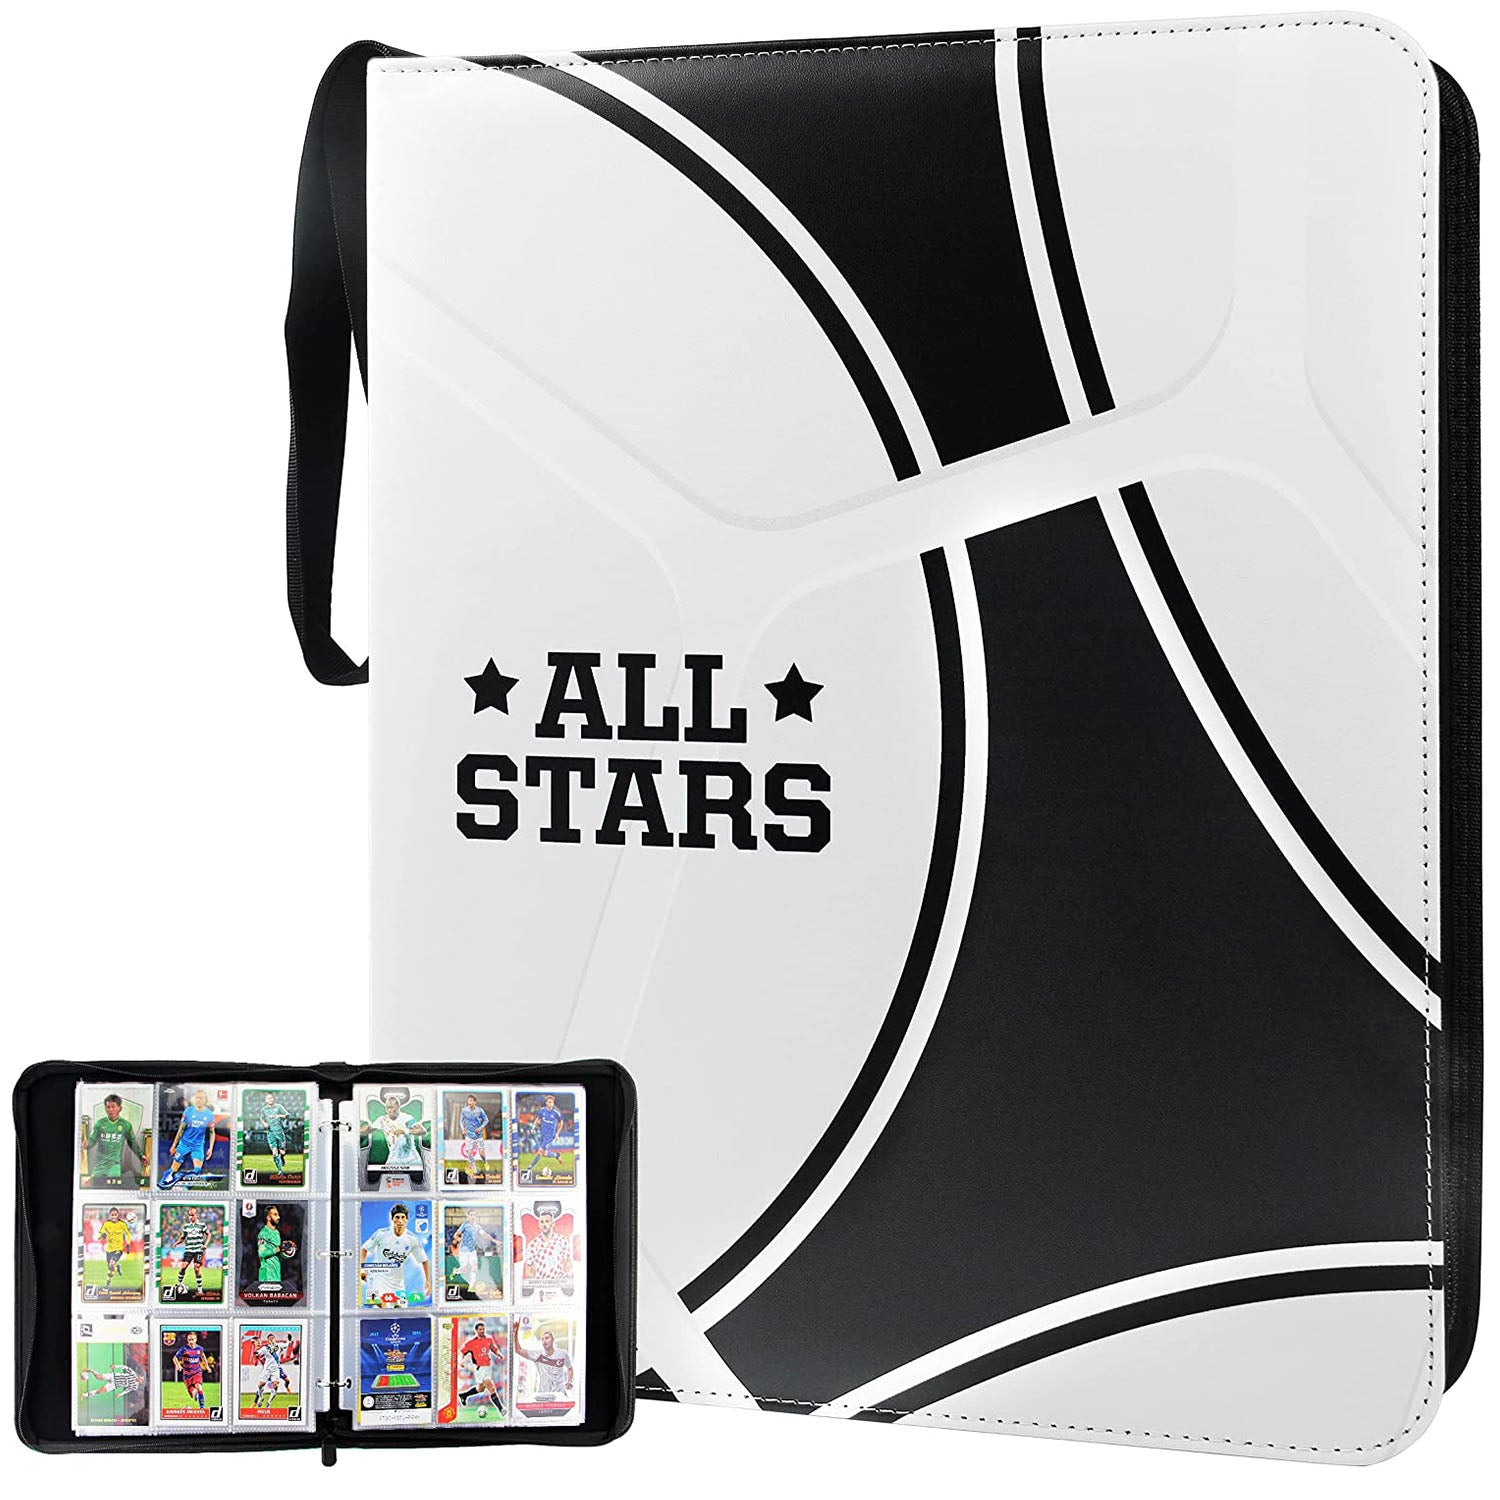 Sports Card Binder, Trading Card Binder 9 Pocket with 50 Sleeves Fits 900  Sport Cards, Sports Card H…See more Sports Card Binder, Trading Card Binder